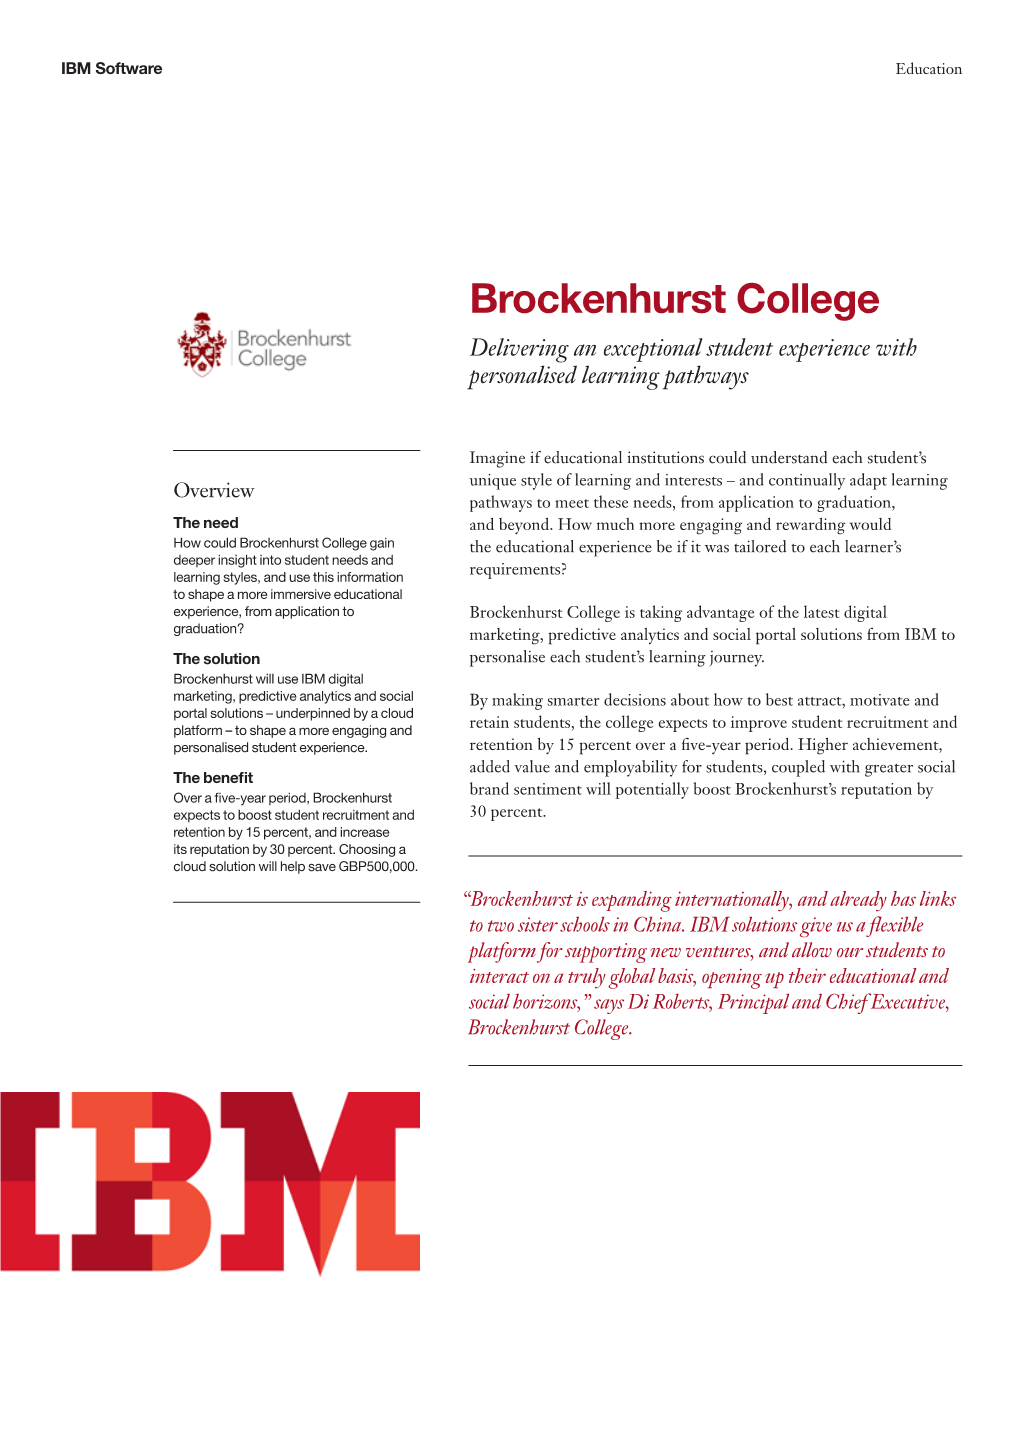 Brockenhurst College Delivering an Exceptional Student Experience with Personalised Learning Pathways